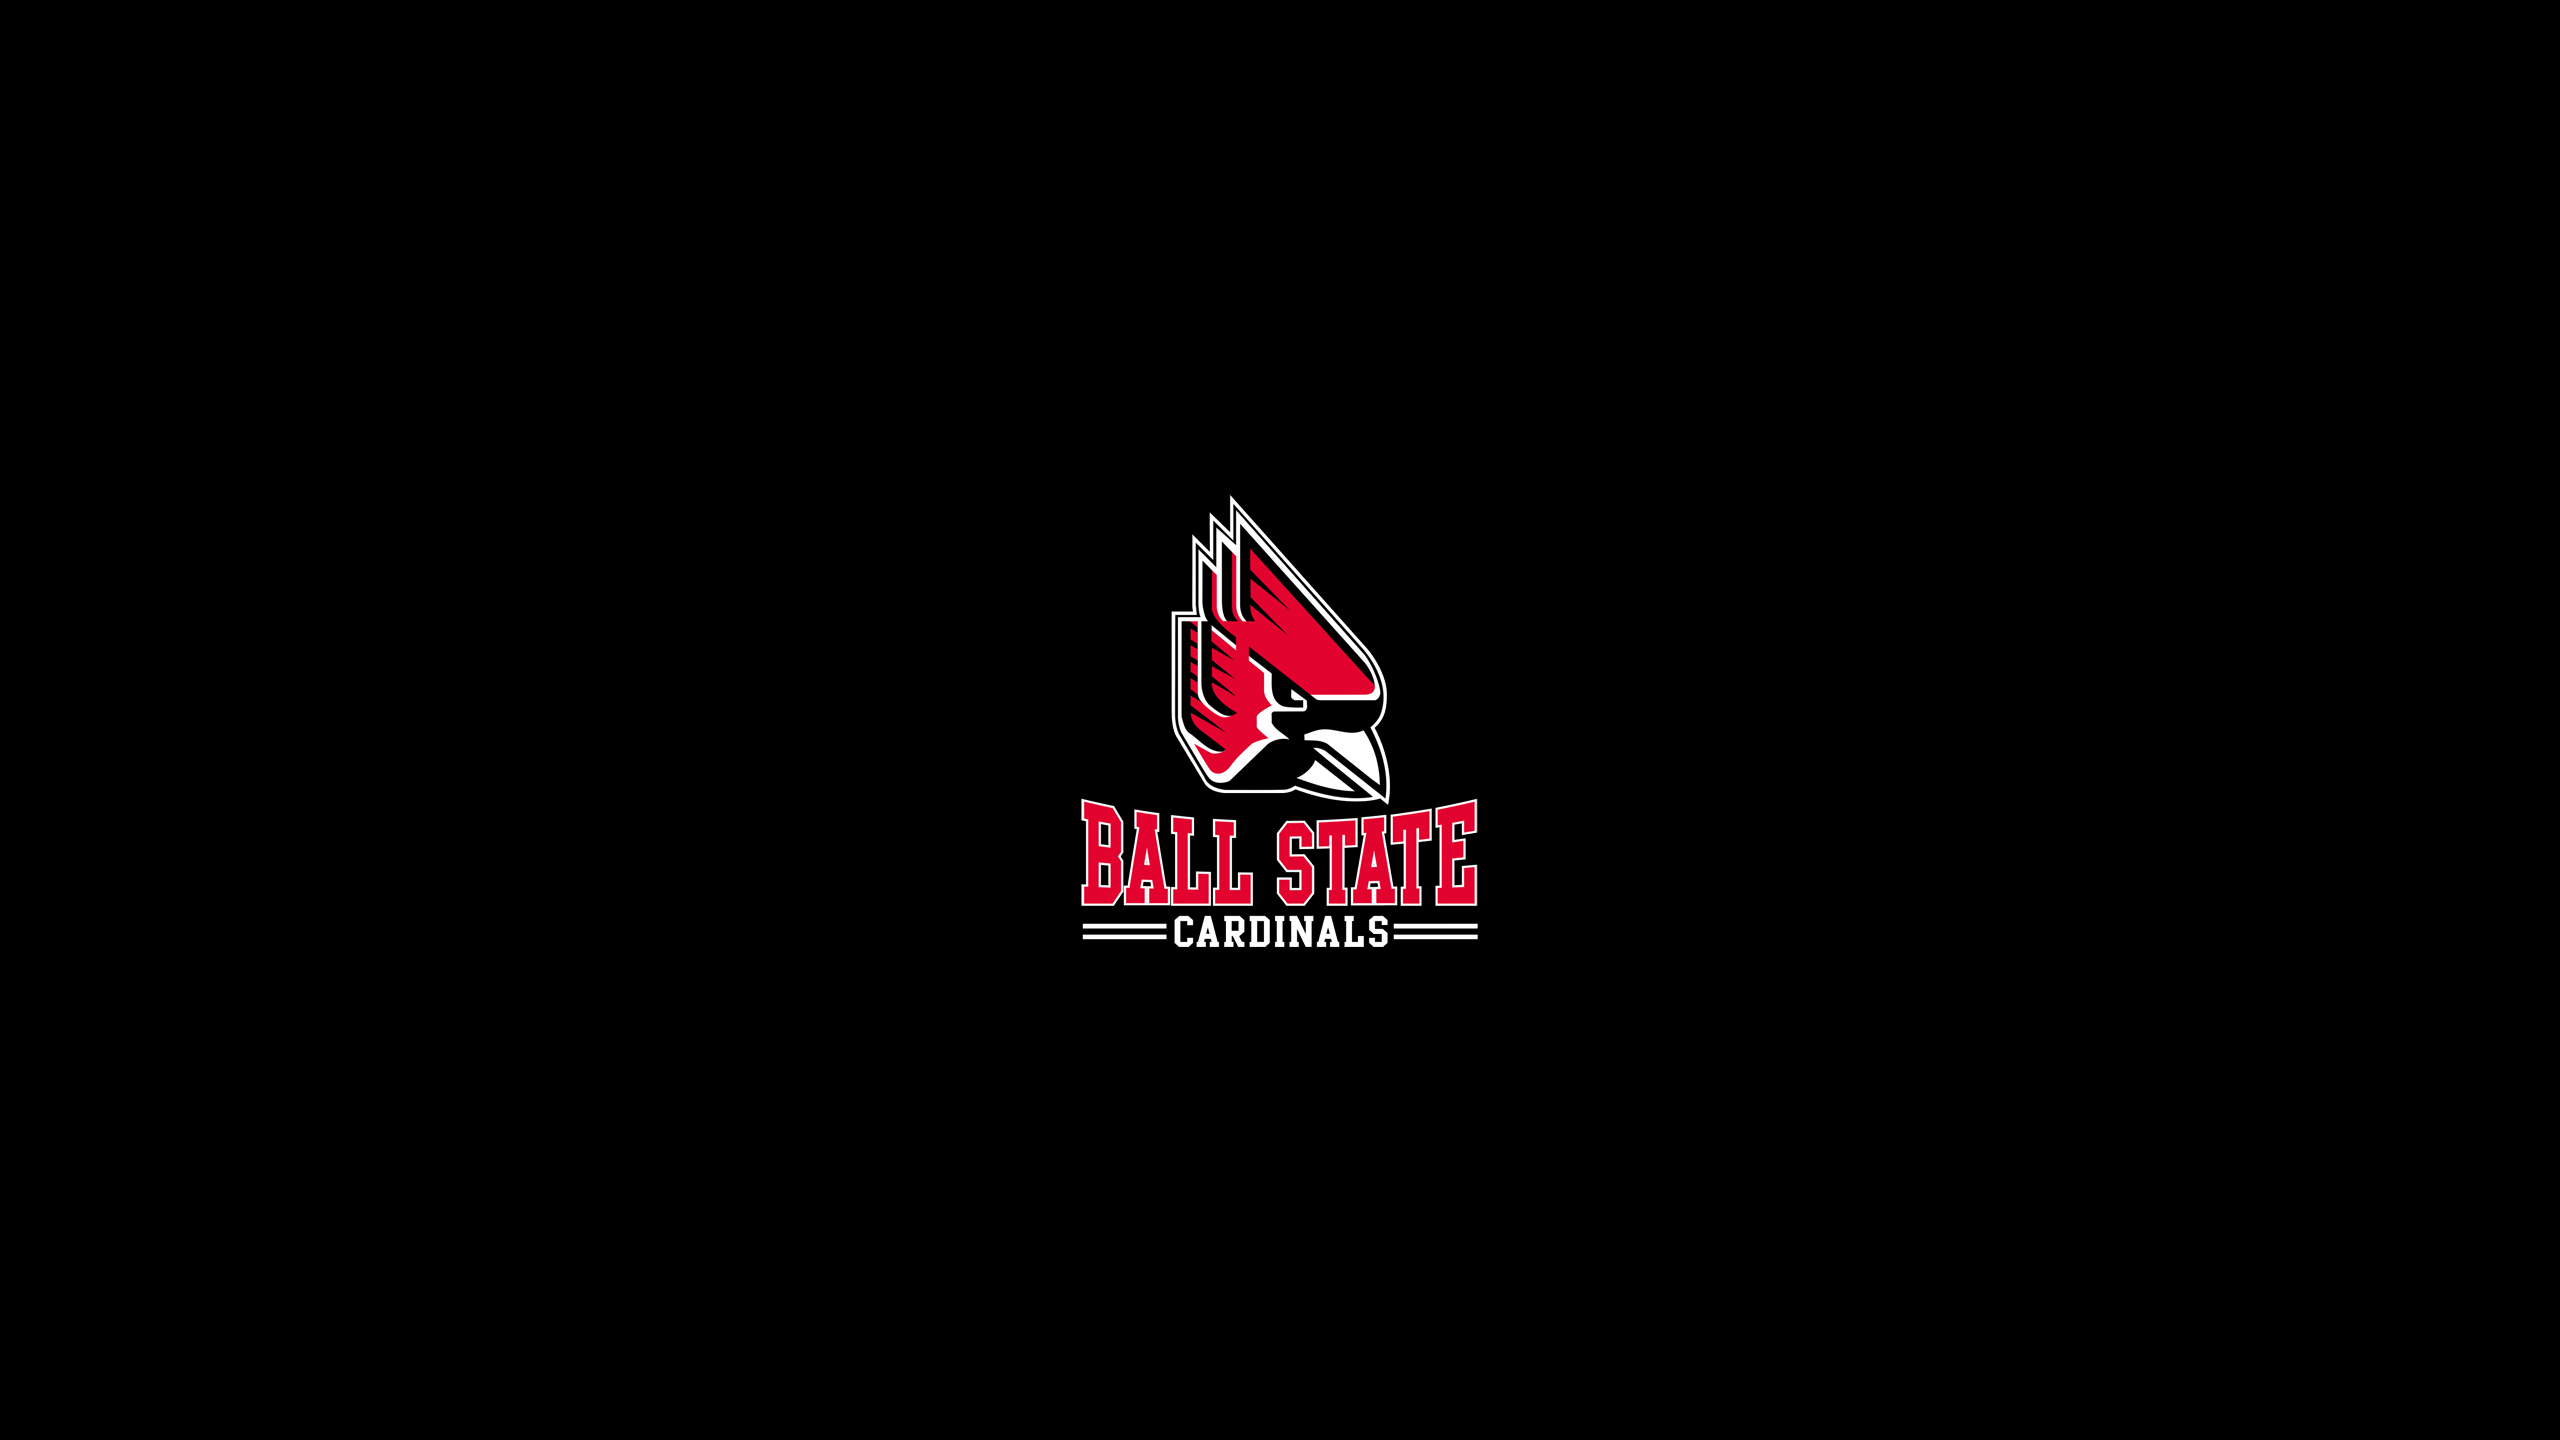 Ball State Cardinals Basketball - Square Bettor